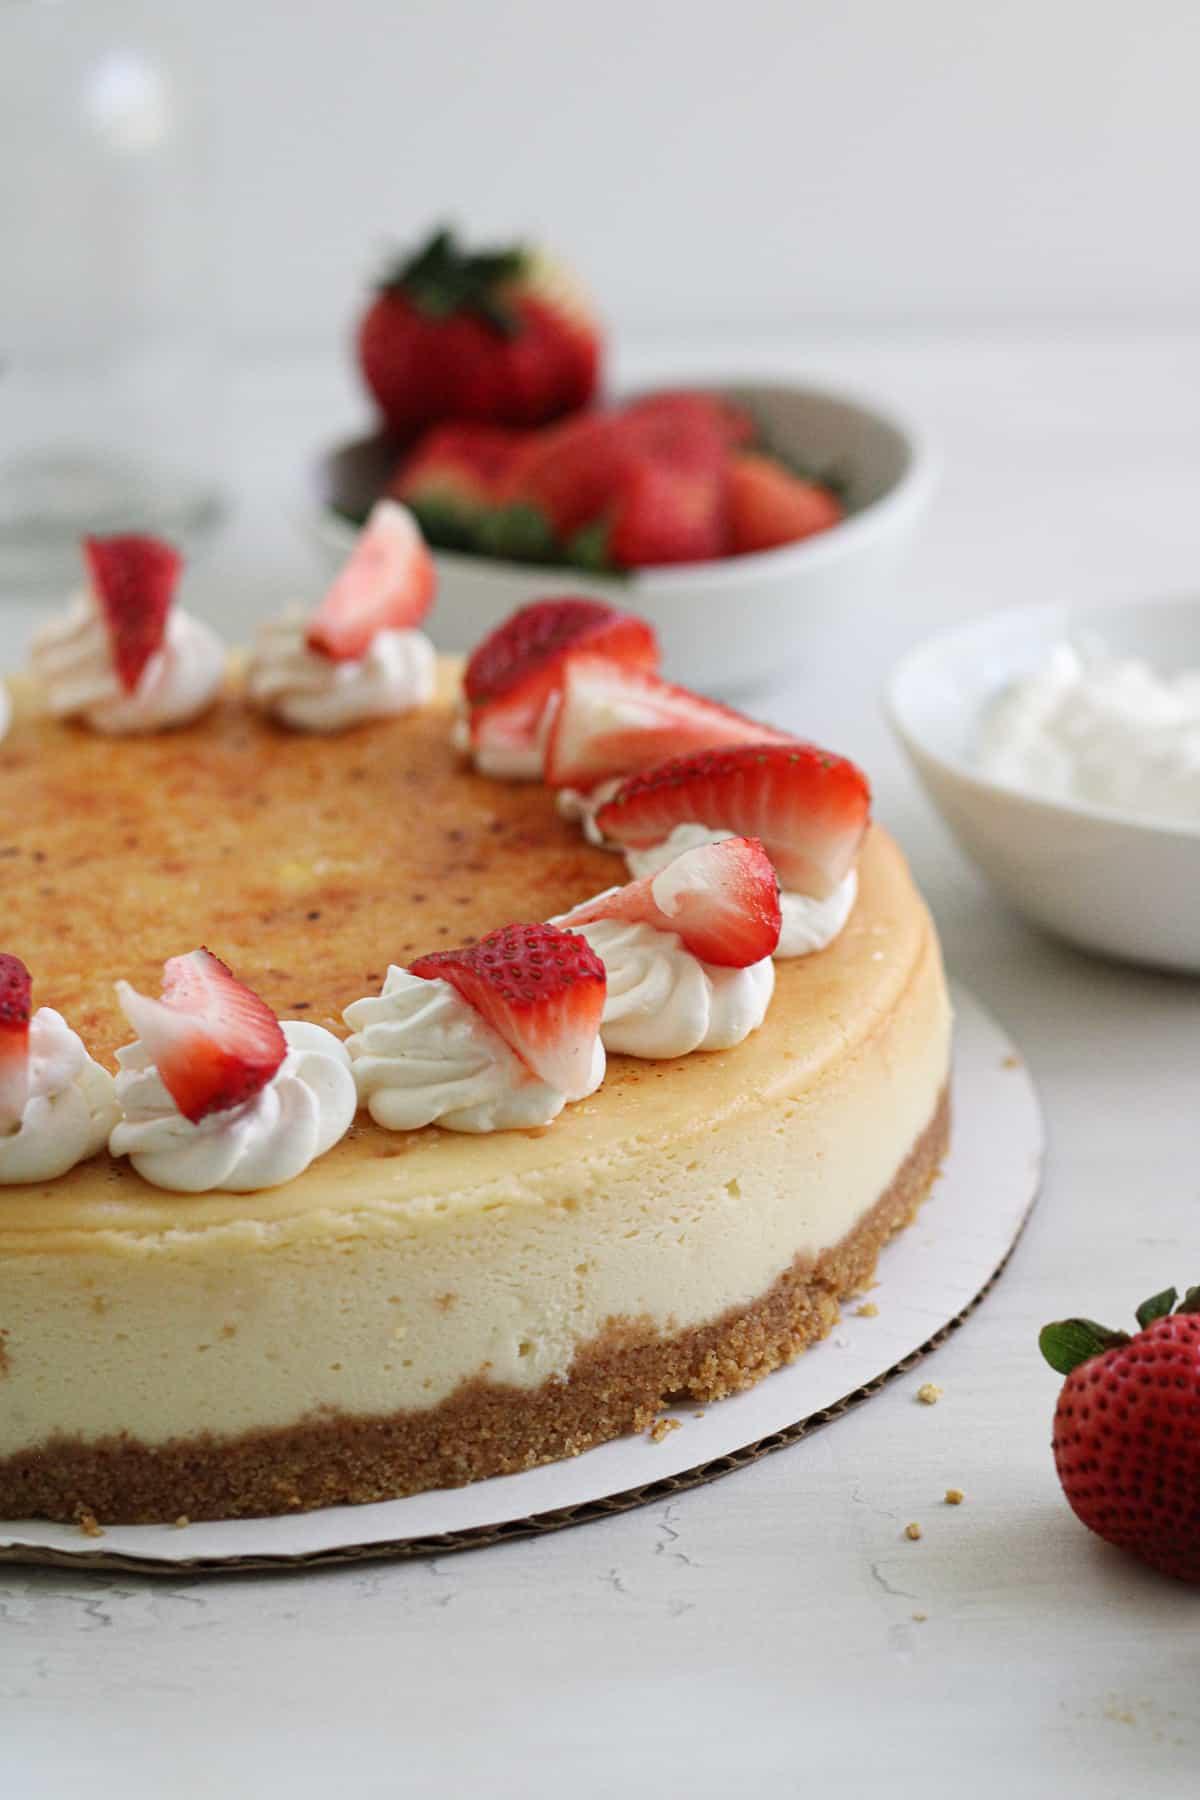 New York Cheesecake is a great dessert to go with spaghetti.